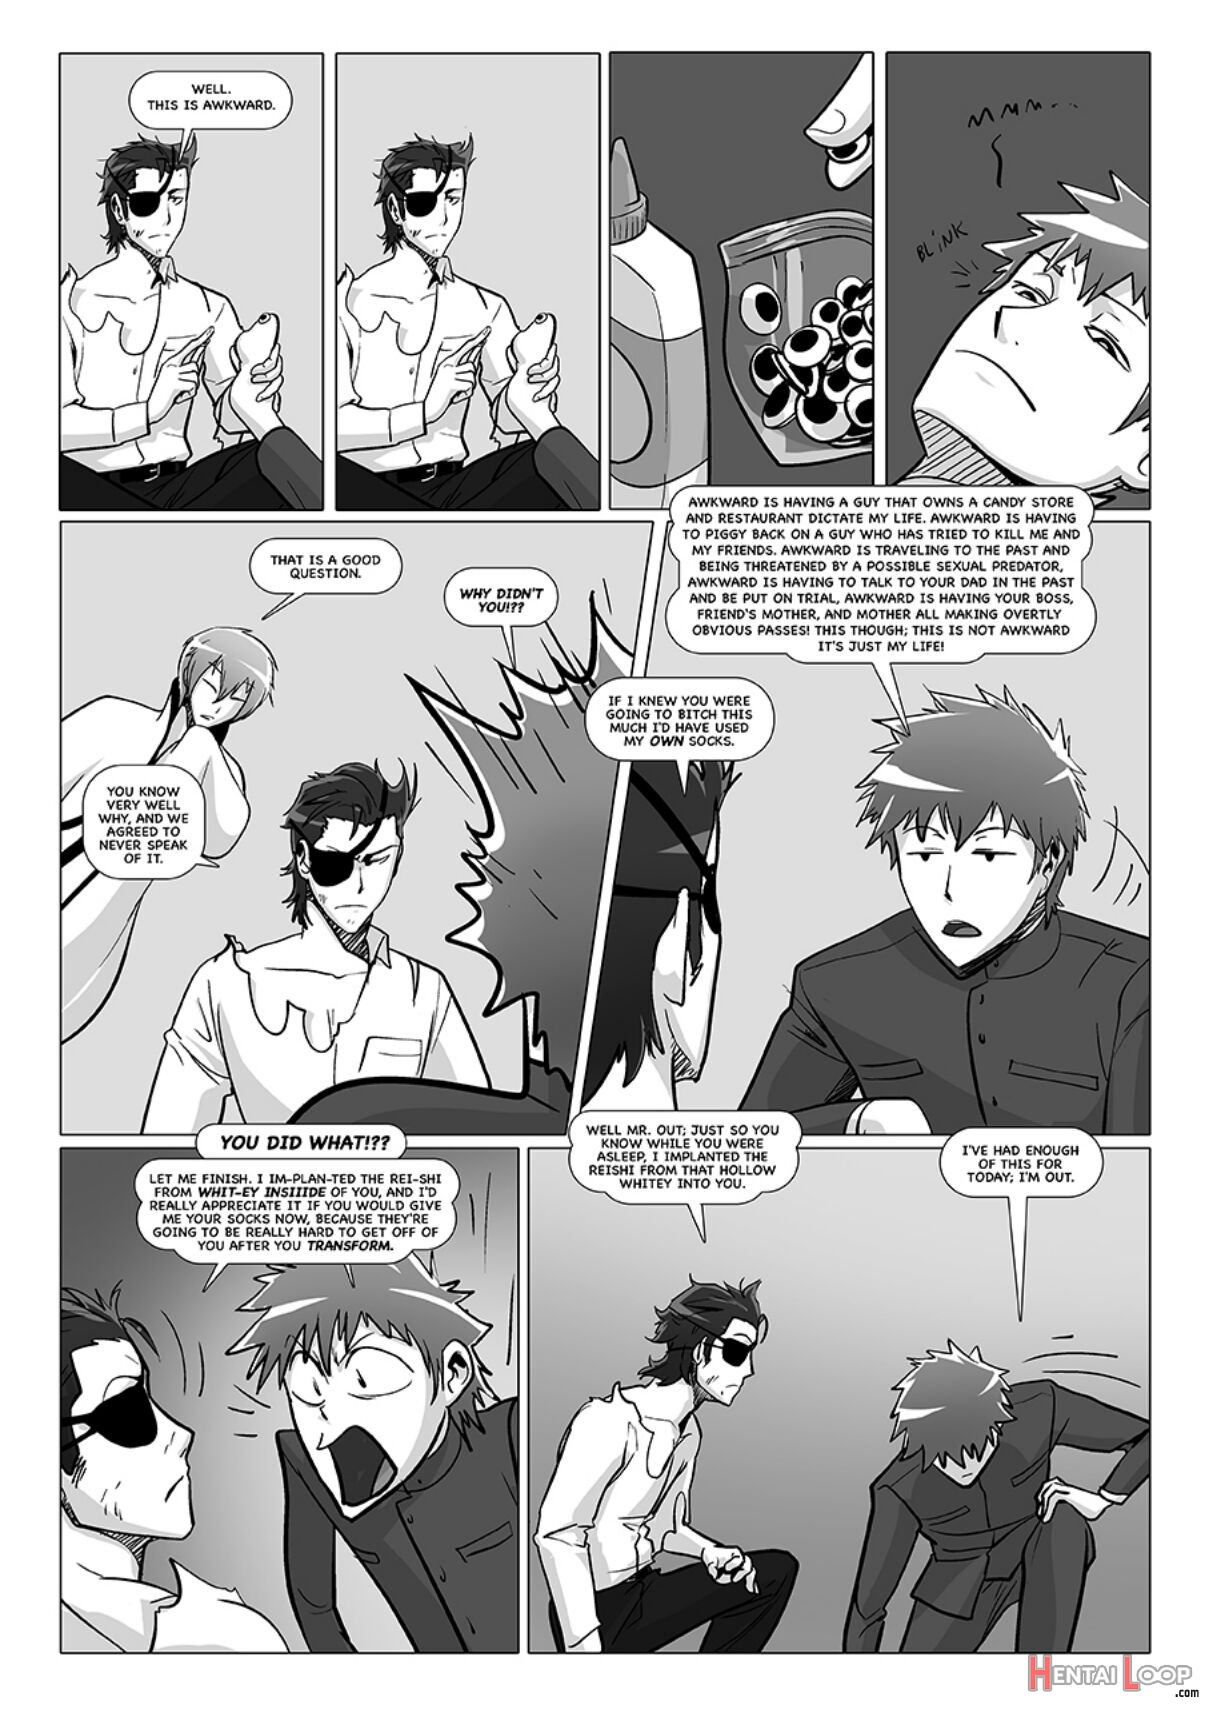 Happy To Serve You - Xxx Version page 454